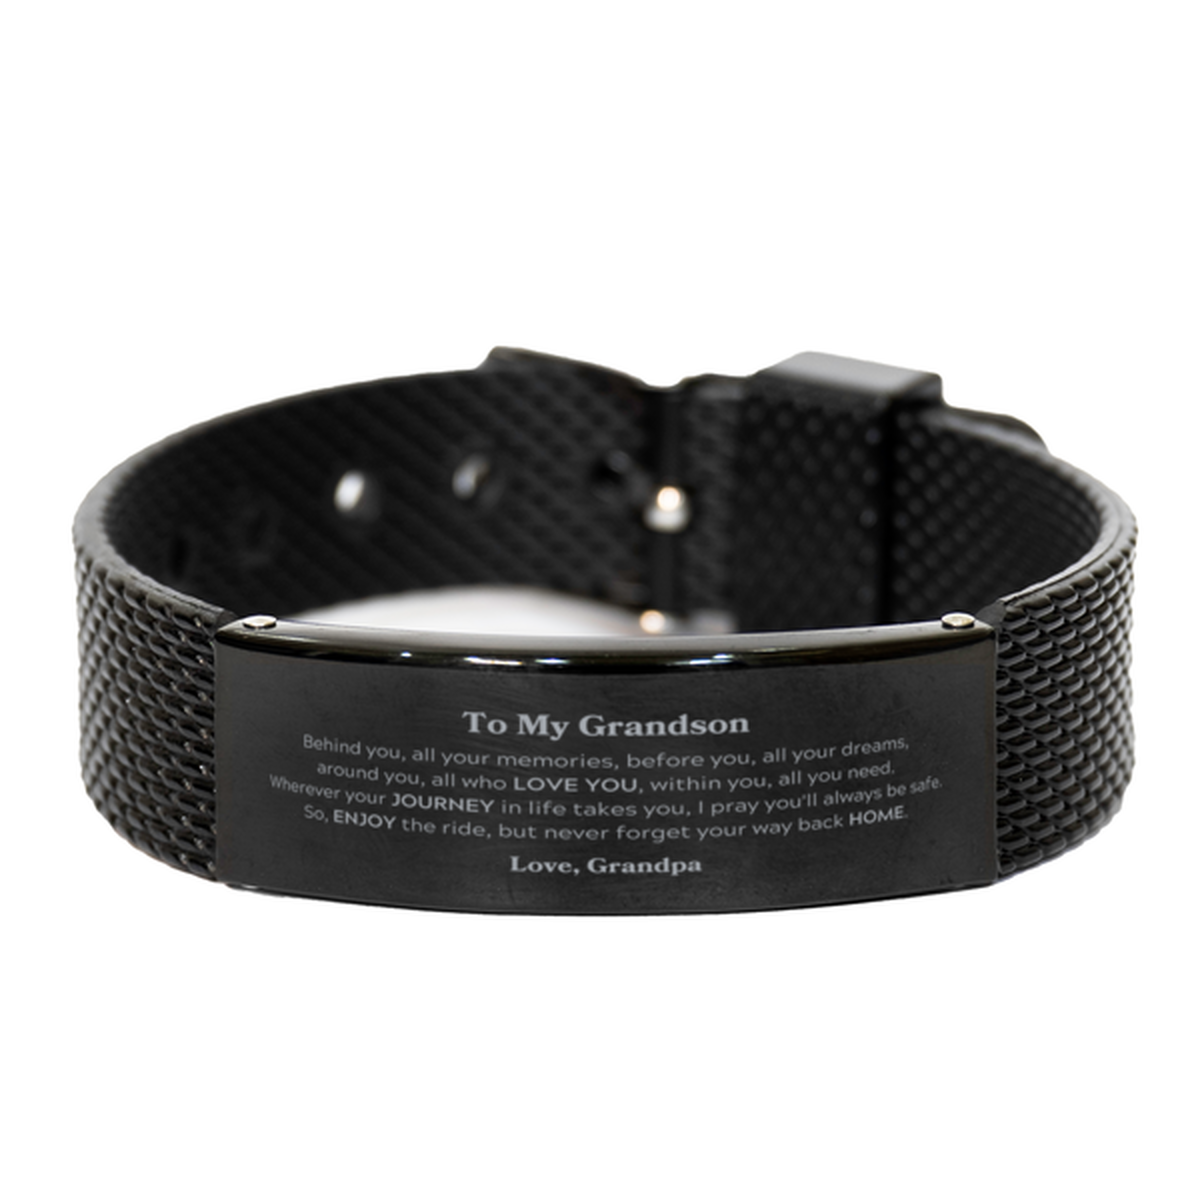 To My Grandson Graduation Gifts from Grandpa, Grandson Black Shark Mesh Bracelet Christmas Birthday Gifts for Grandson Behind you, all your memories, before you, all your dreams. Love, Grandpa